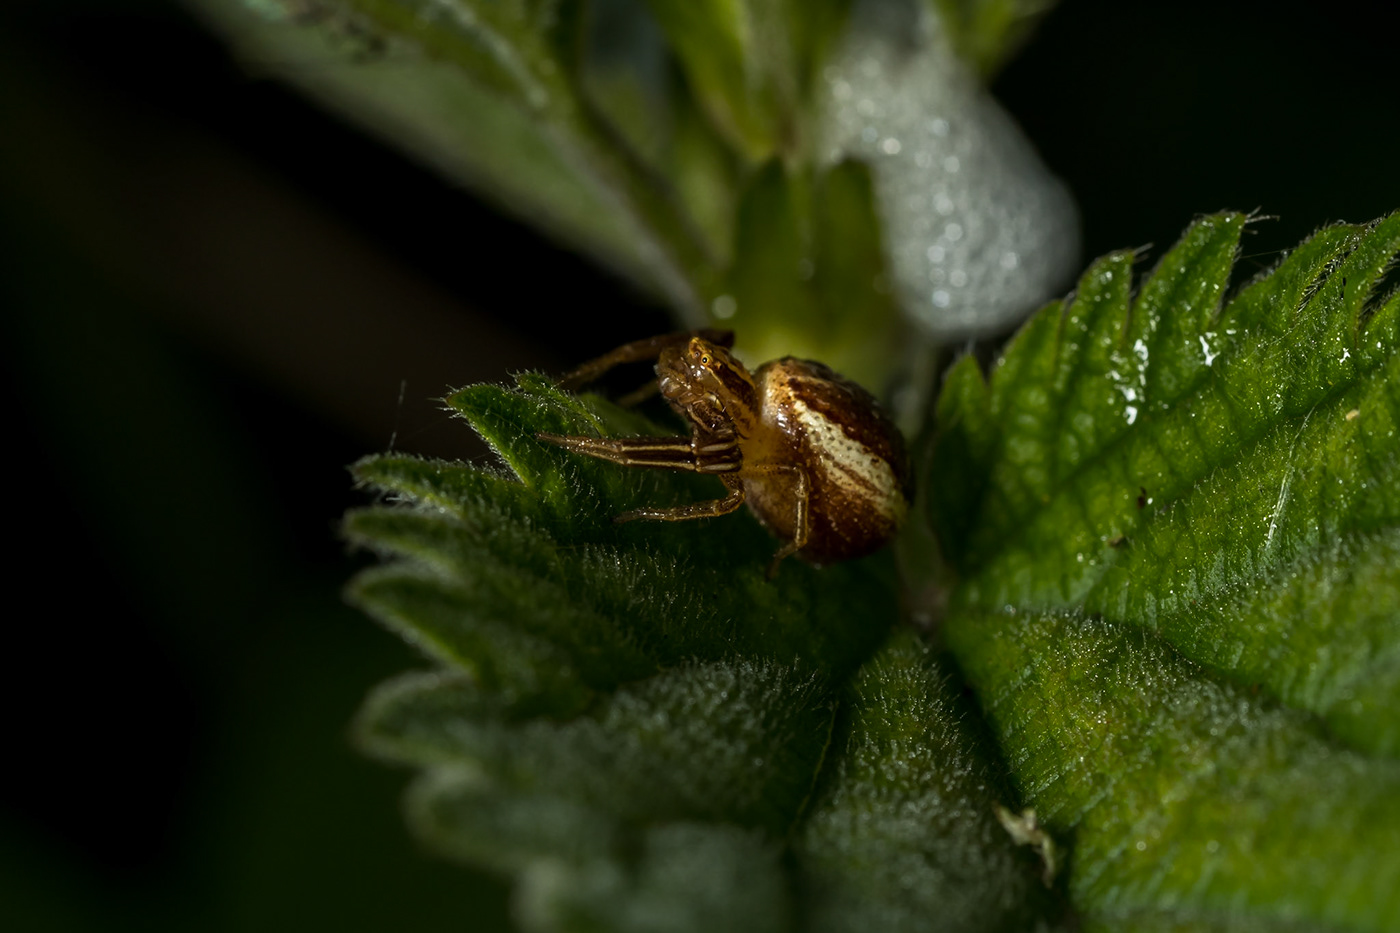 flashphotography insectphotography Insects macro macrophotography naturephotography olympusphotography spider spiderphotography